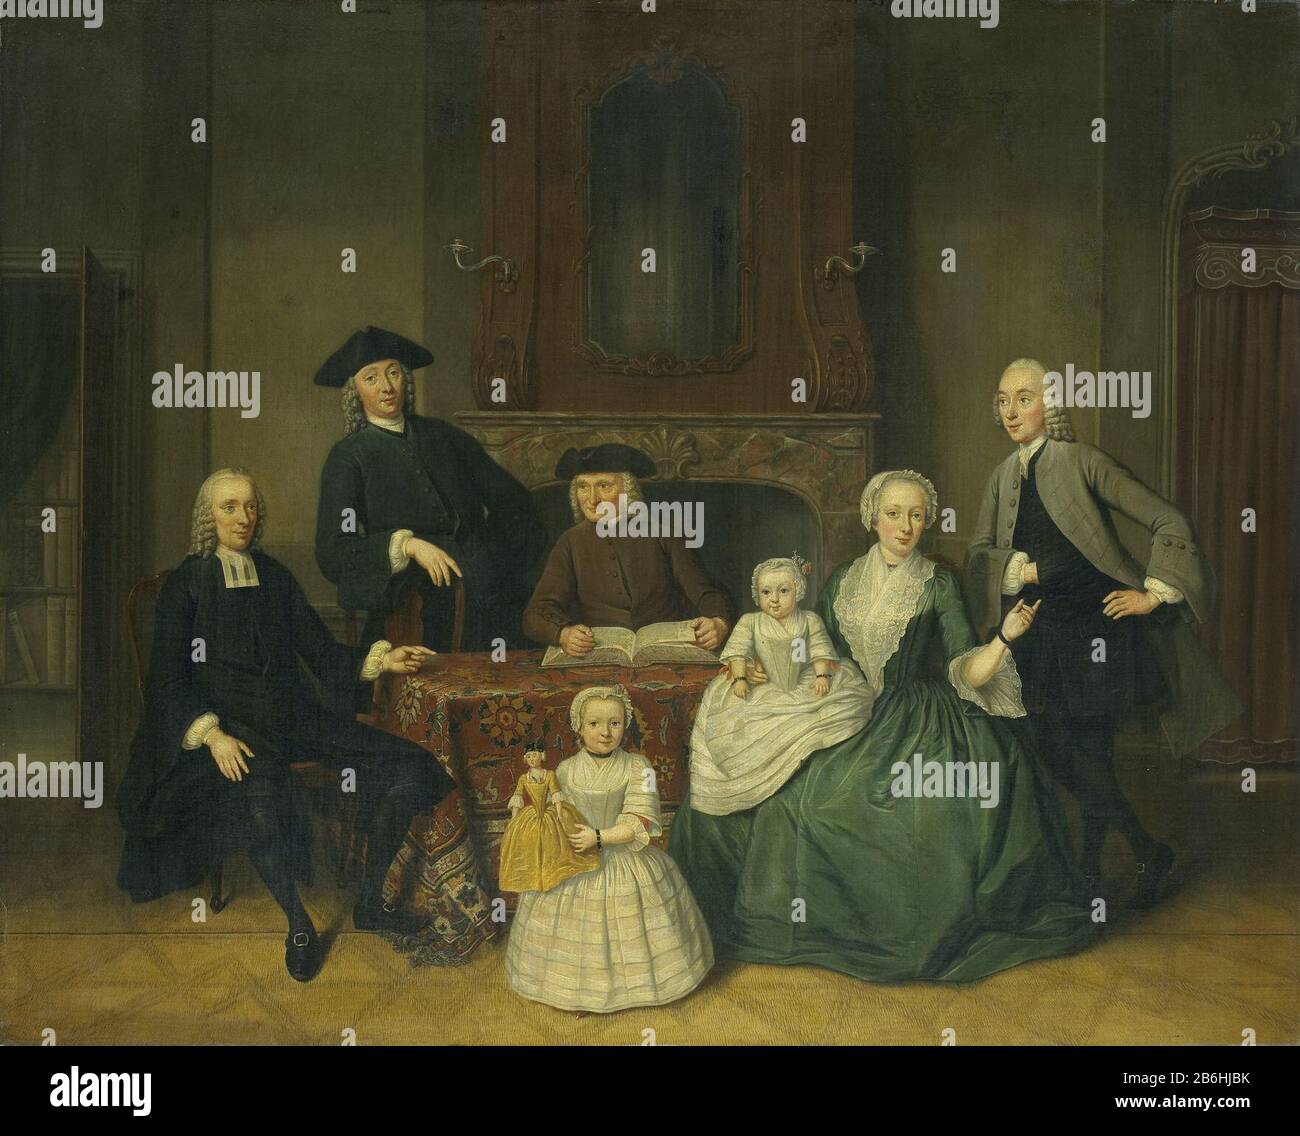 The Amsterdam Mennonite Brak Family, SK-A-2136 Family Portrait Of The Amsterdam Mennonite Brak family in an interior sitting around a table for a mantelpiece. From left to right: Reverend Jan Beagle (1717-61), his brother Peter Beagle (ca. 1714-after 1778), his father Harmen Beagle (died 1768)., His sister Margaret Hasselaar (1726-80 / 83) with its husband Cornelis Beagle (1724-82). Standing in the foreground is their eldest daughter with a doll, Margaretha (born in 1752) sits on her mother's lap. Left a view through to the bibliotheek. Manufacturer : painter: Tibout Regters (listed building) Stock Photo